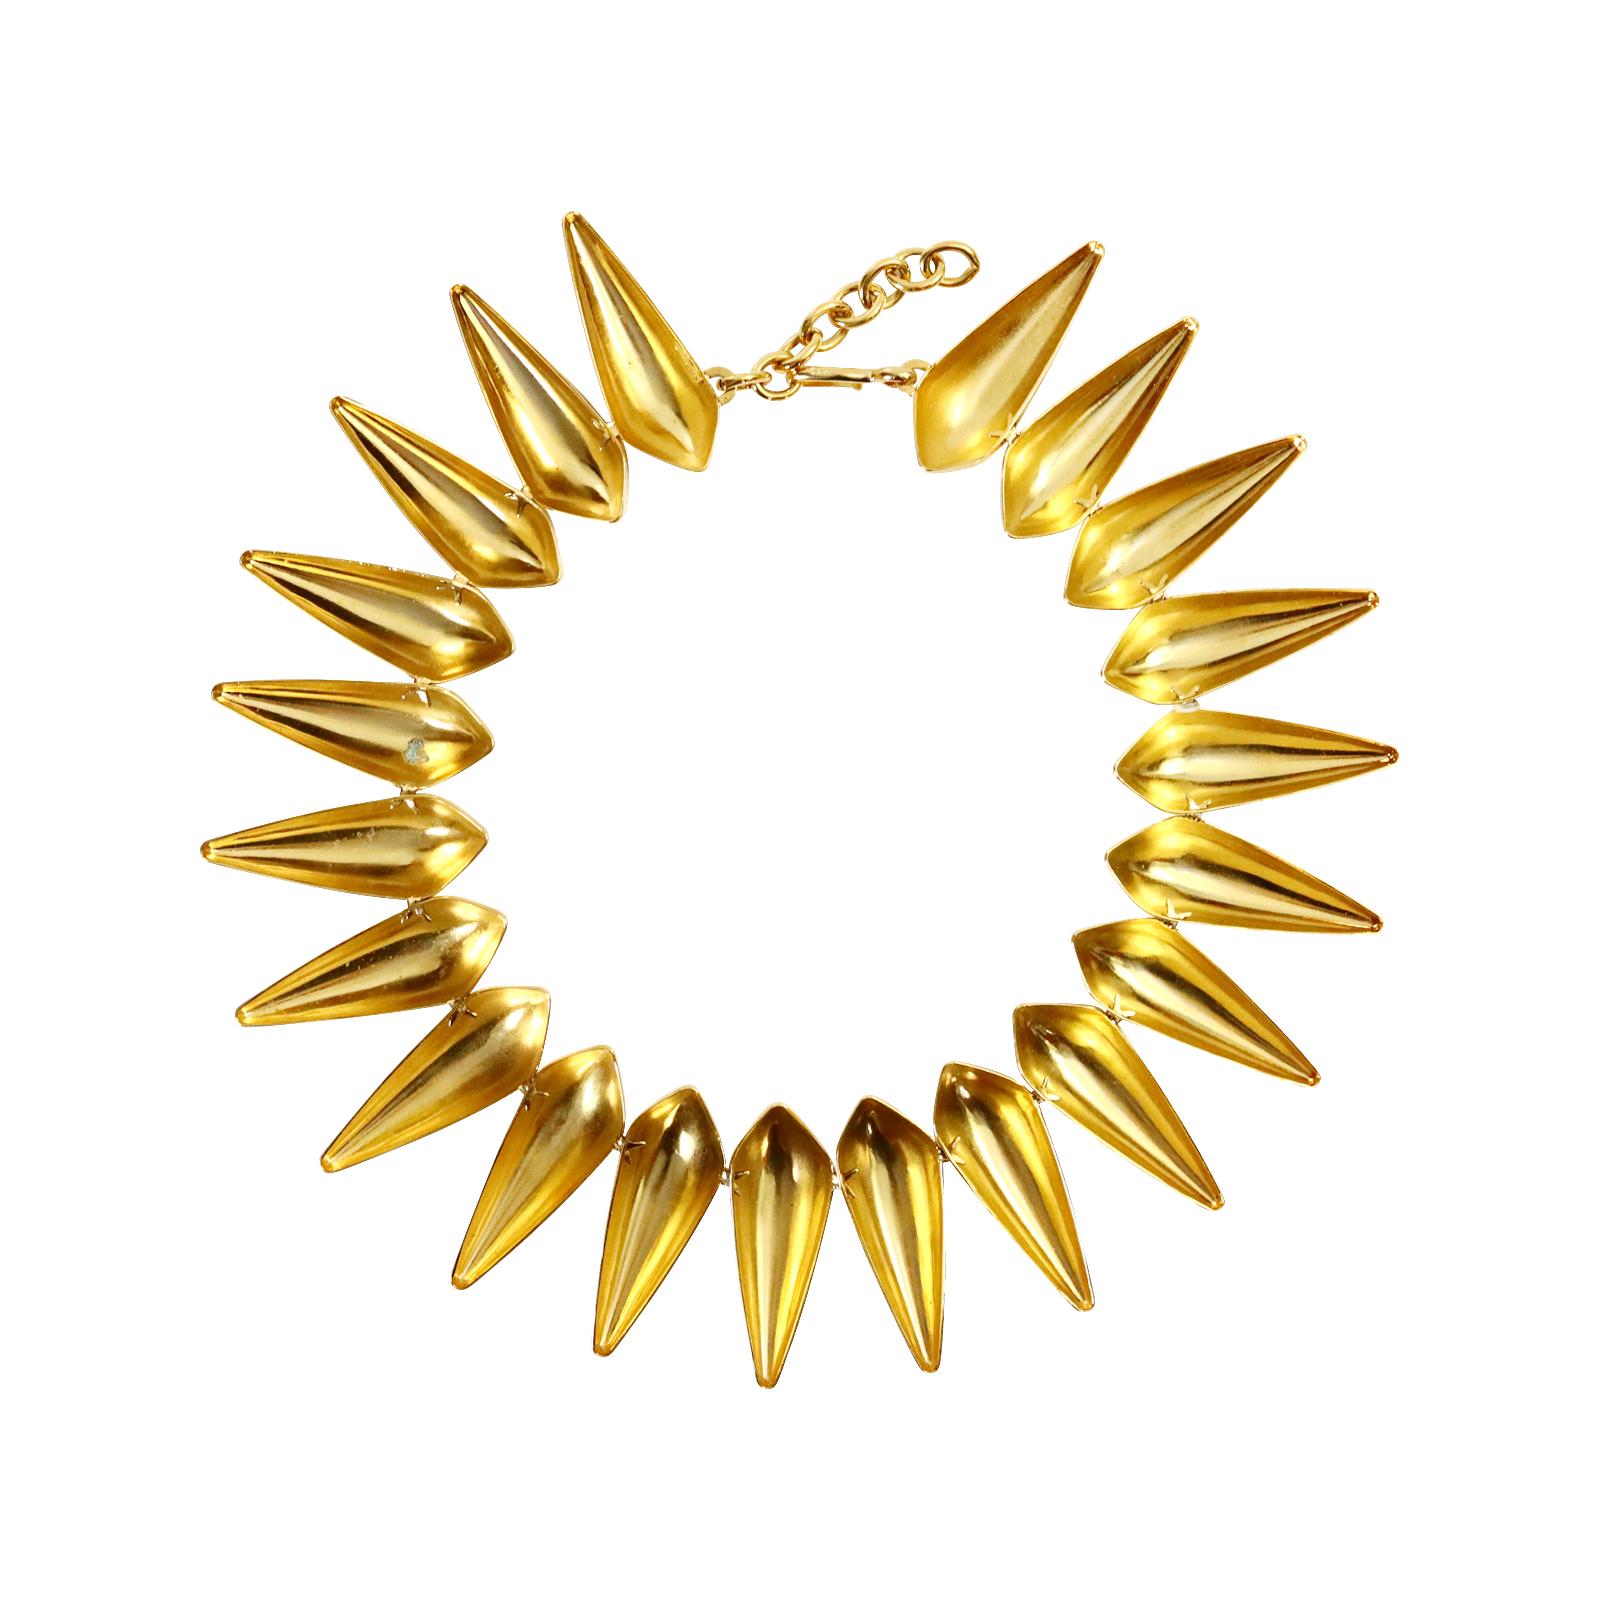 Vintage Monet Spiky Gold Tone Necklace Circa 1970s For Sale 2